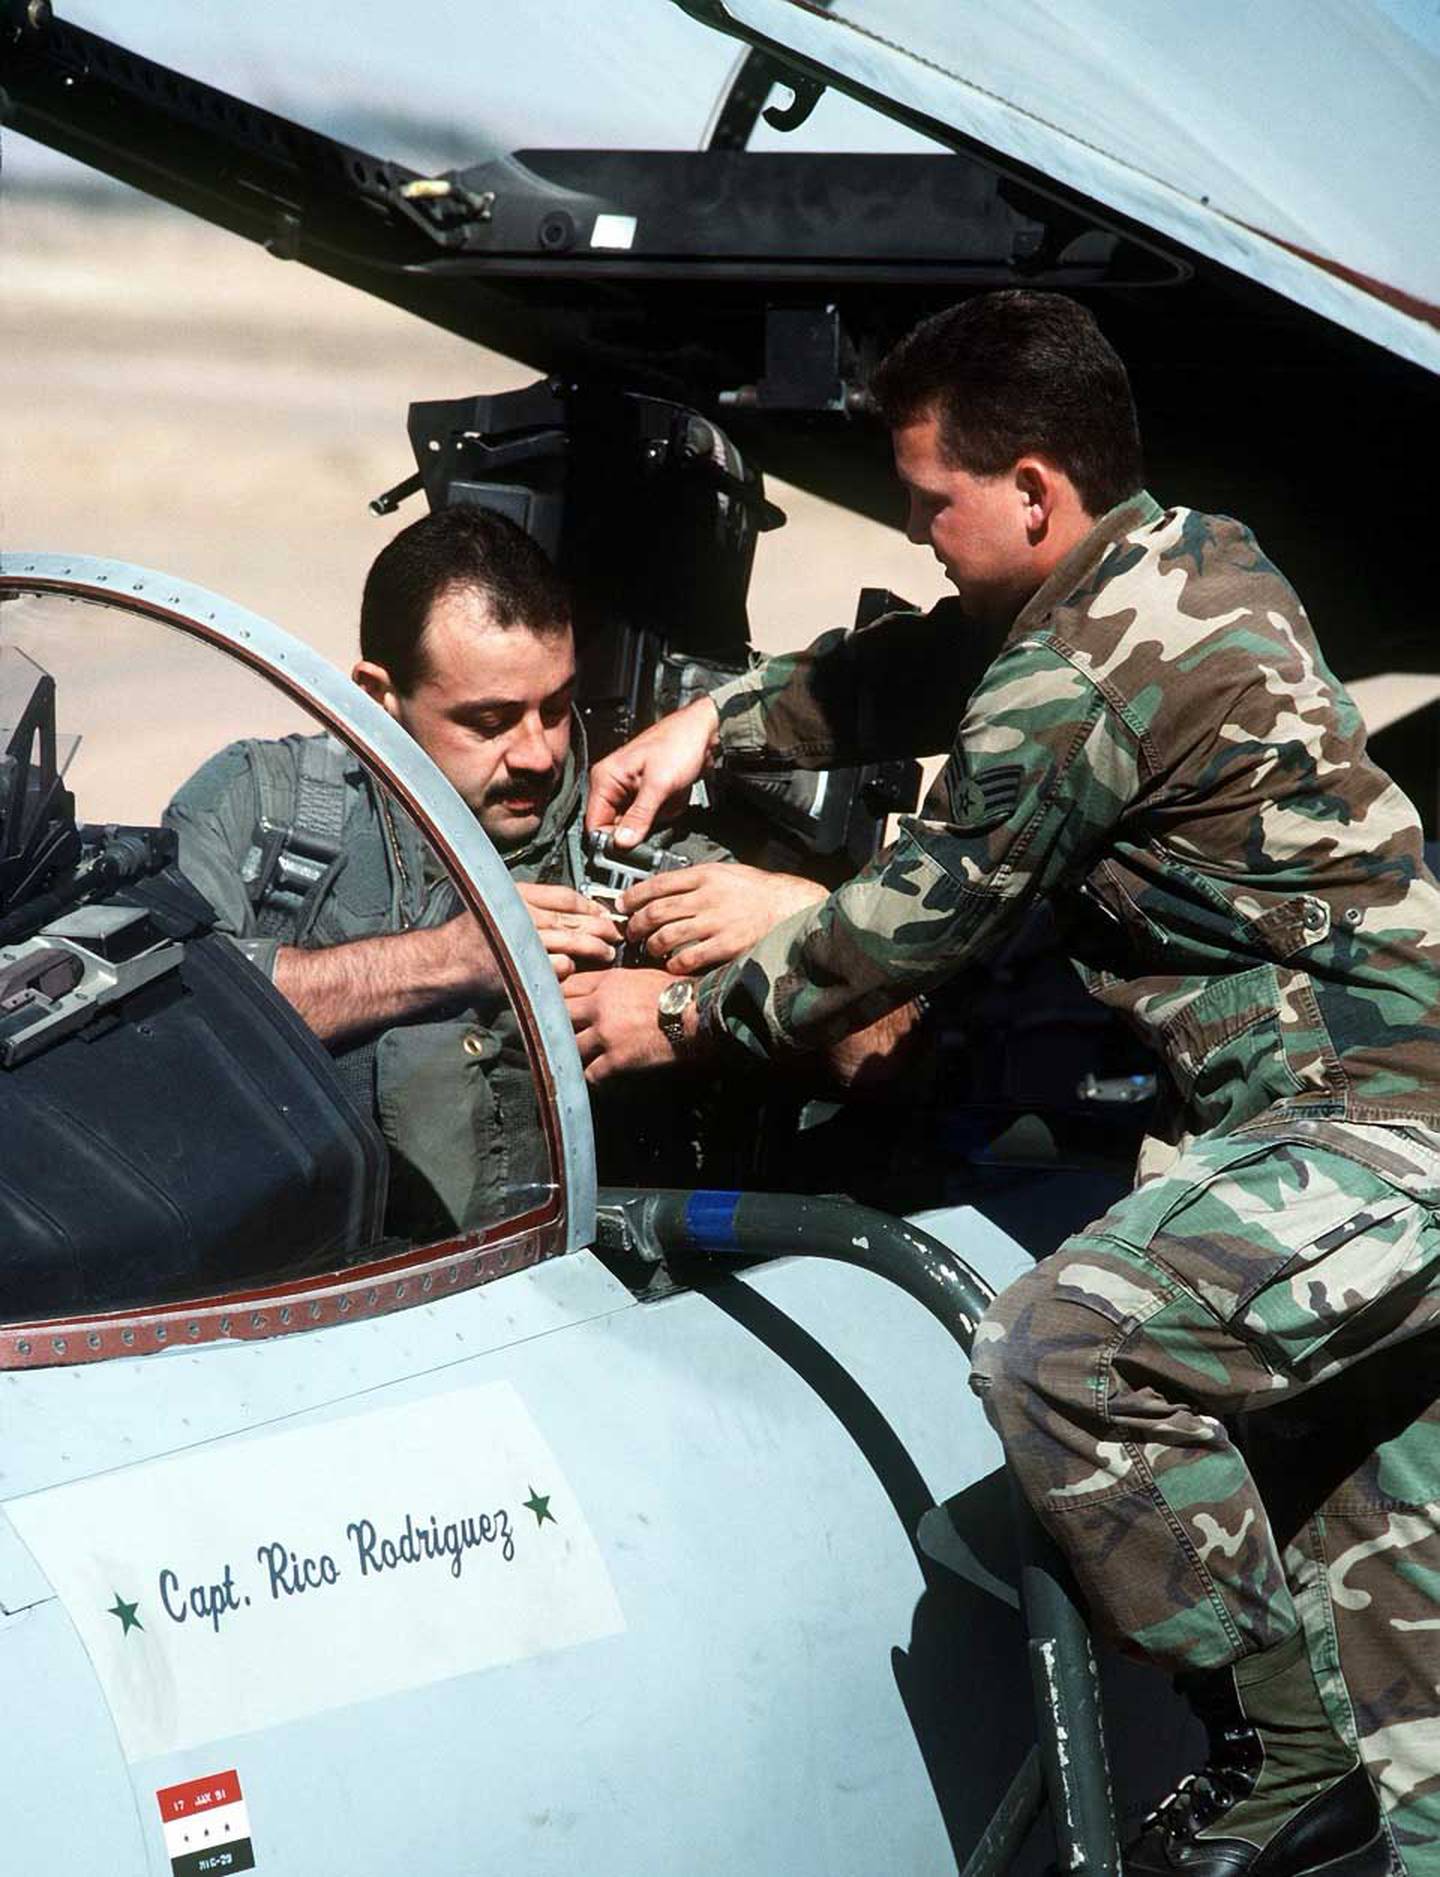 Cesar “Rico” Rodriguez straps into his F-15 Thunderbird before a mission during Operation Desert Storm.